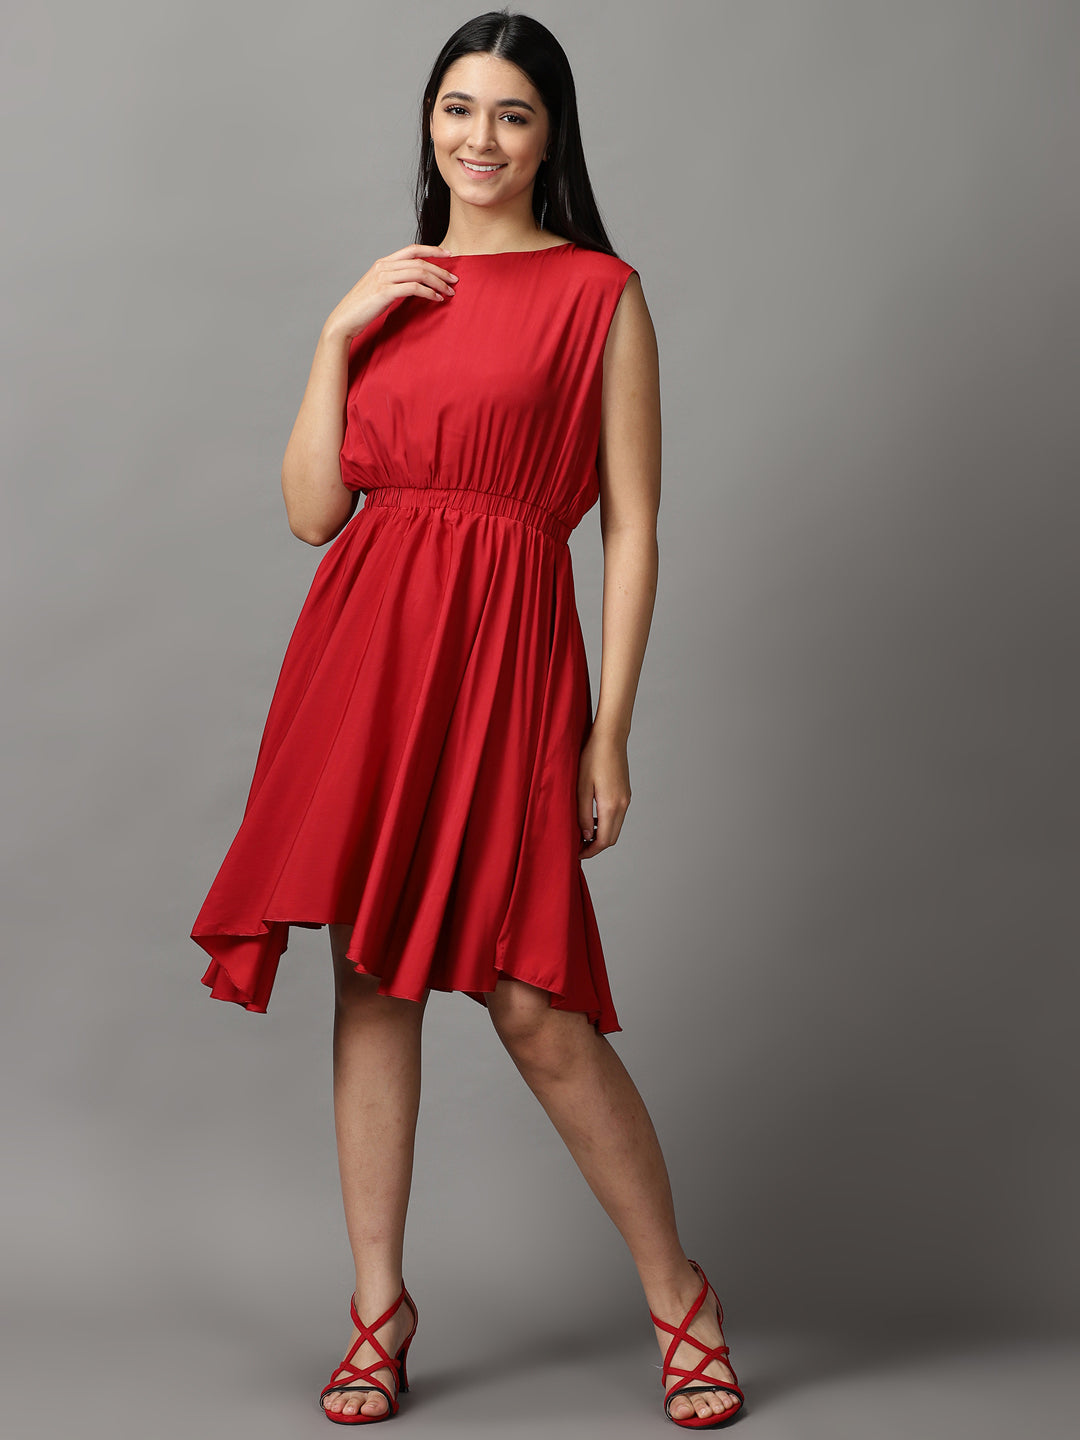 Women's Red Solid Fit and Flare Dress